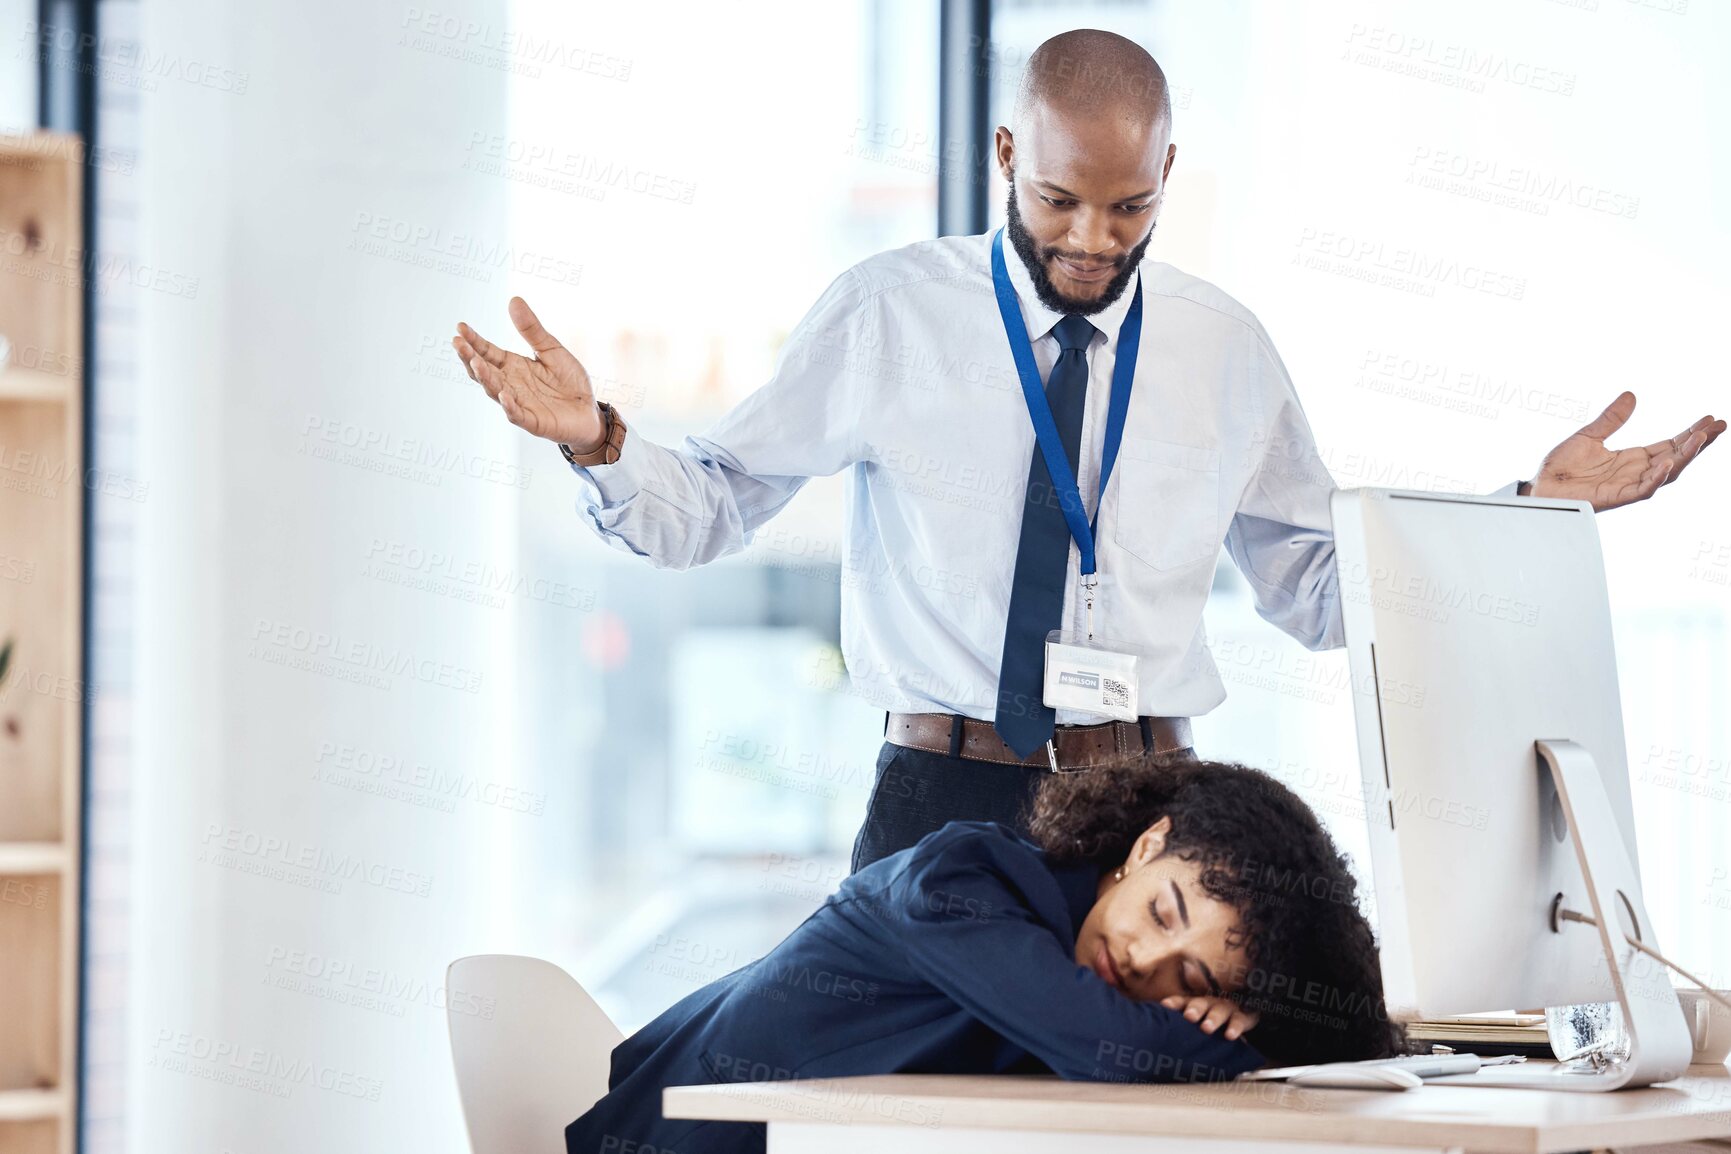 Buy stock photo Lazy, boss and businesswoman or worker sleeping in office while frustrated or confused black man and manager watch. Employee burnout, fatigue and asleep, exhausted and overworked with angry colleague